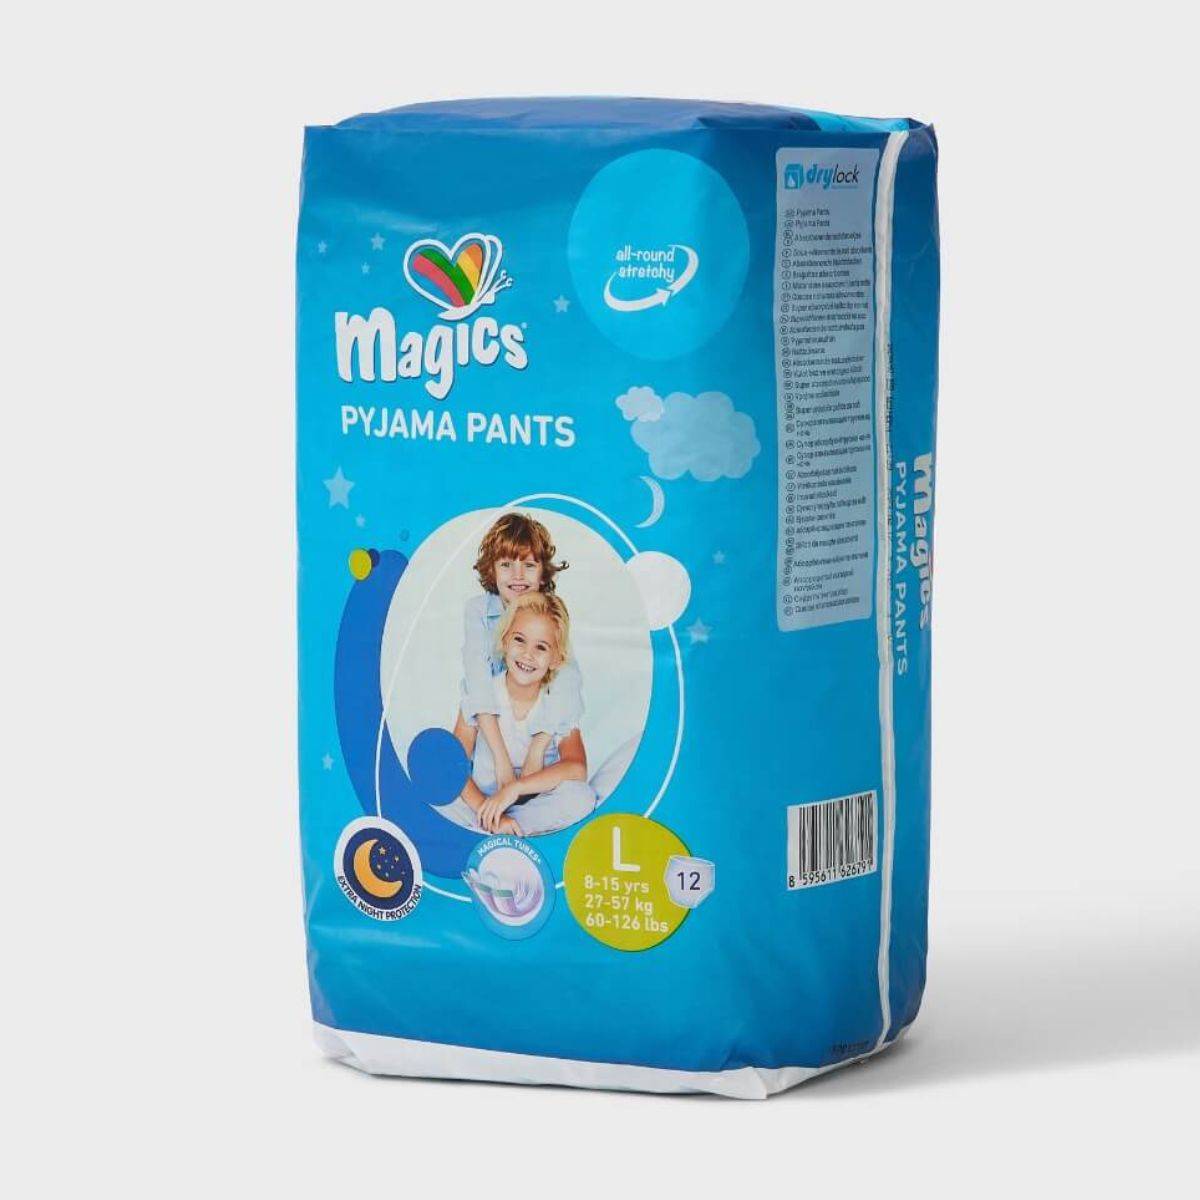 A package of Magics Youth Pants for incontinence